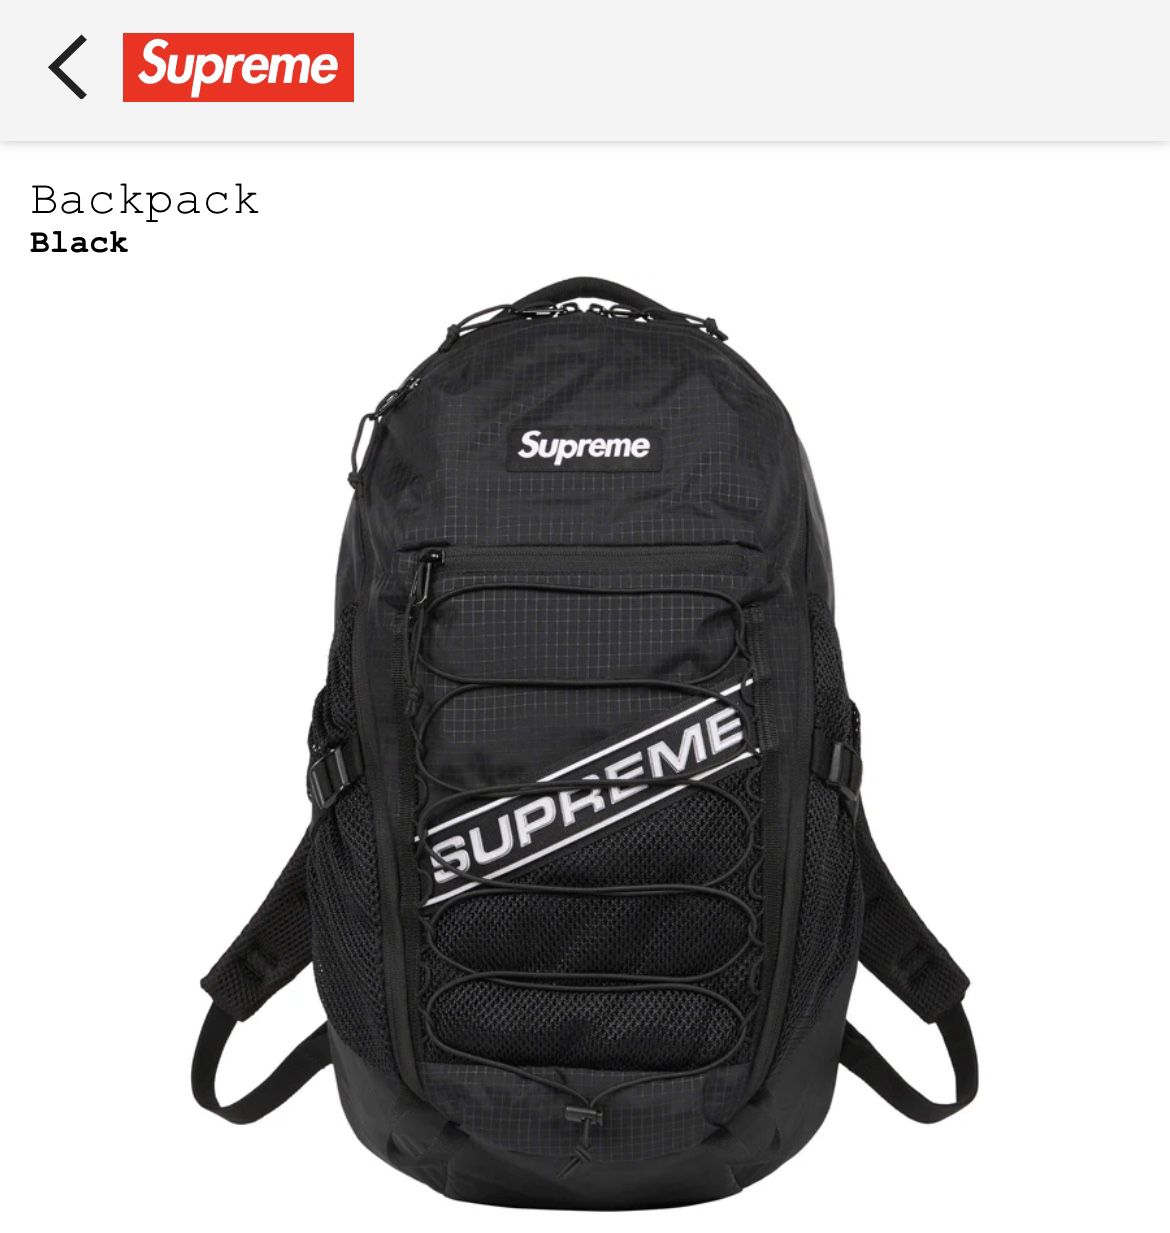 Supreme Backpack Black FW23 for Sale in Los Angeles, CA - OfferUp